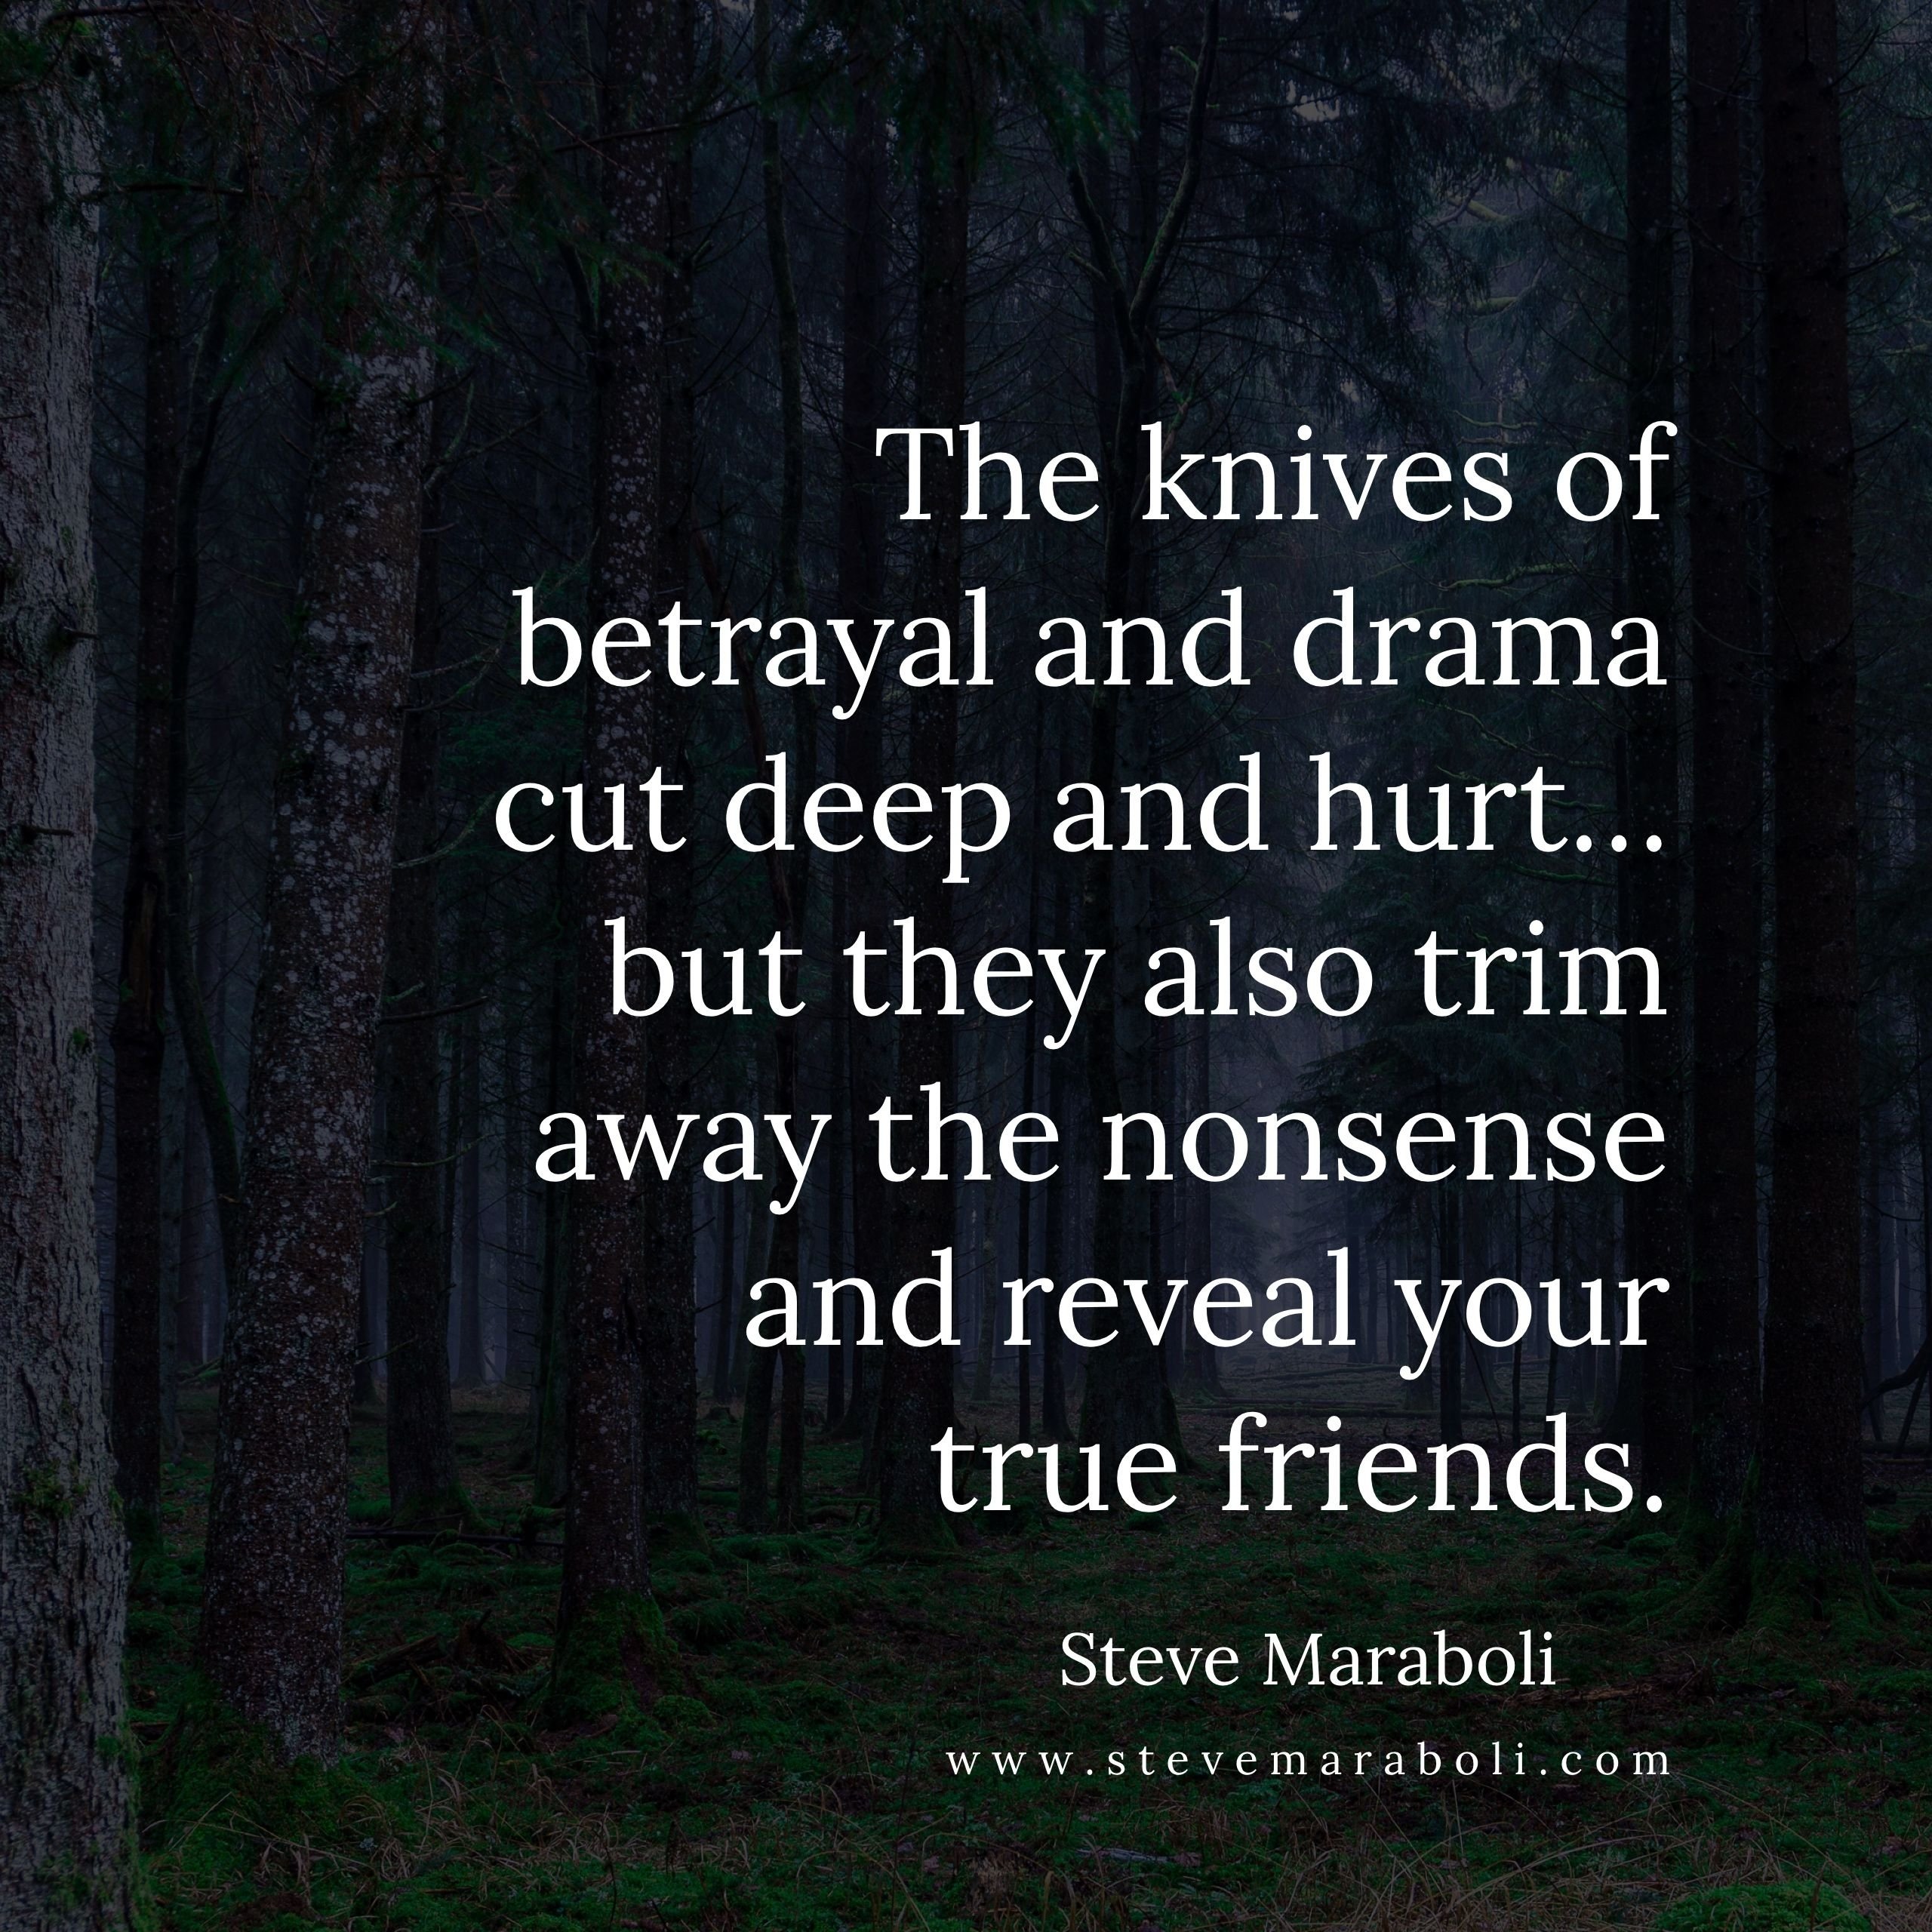 10 Stunning Revenge Ideas For Backstabbing Friends the knives of betrayal and drama cut deep and hurt but they also 1 2022